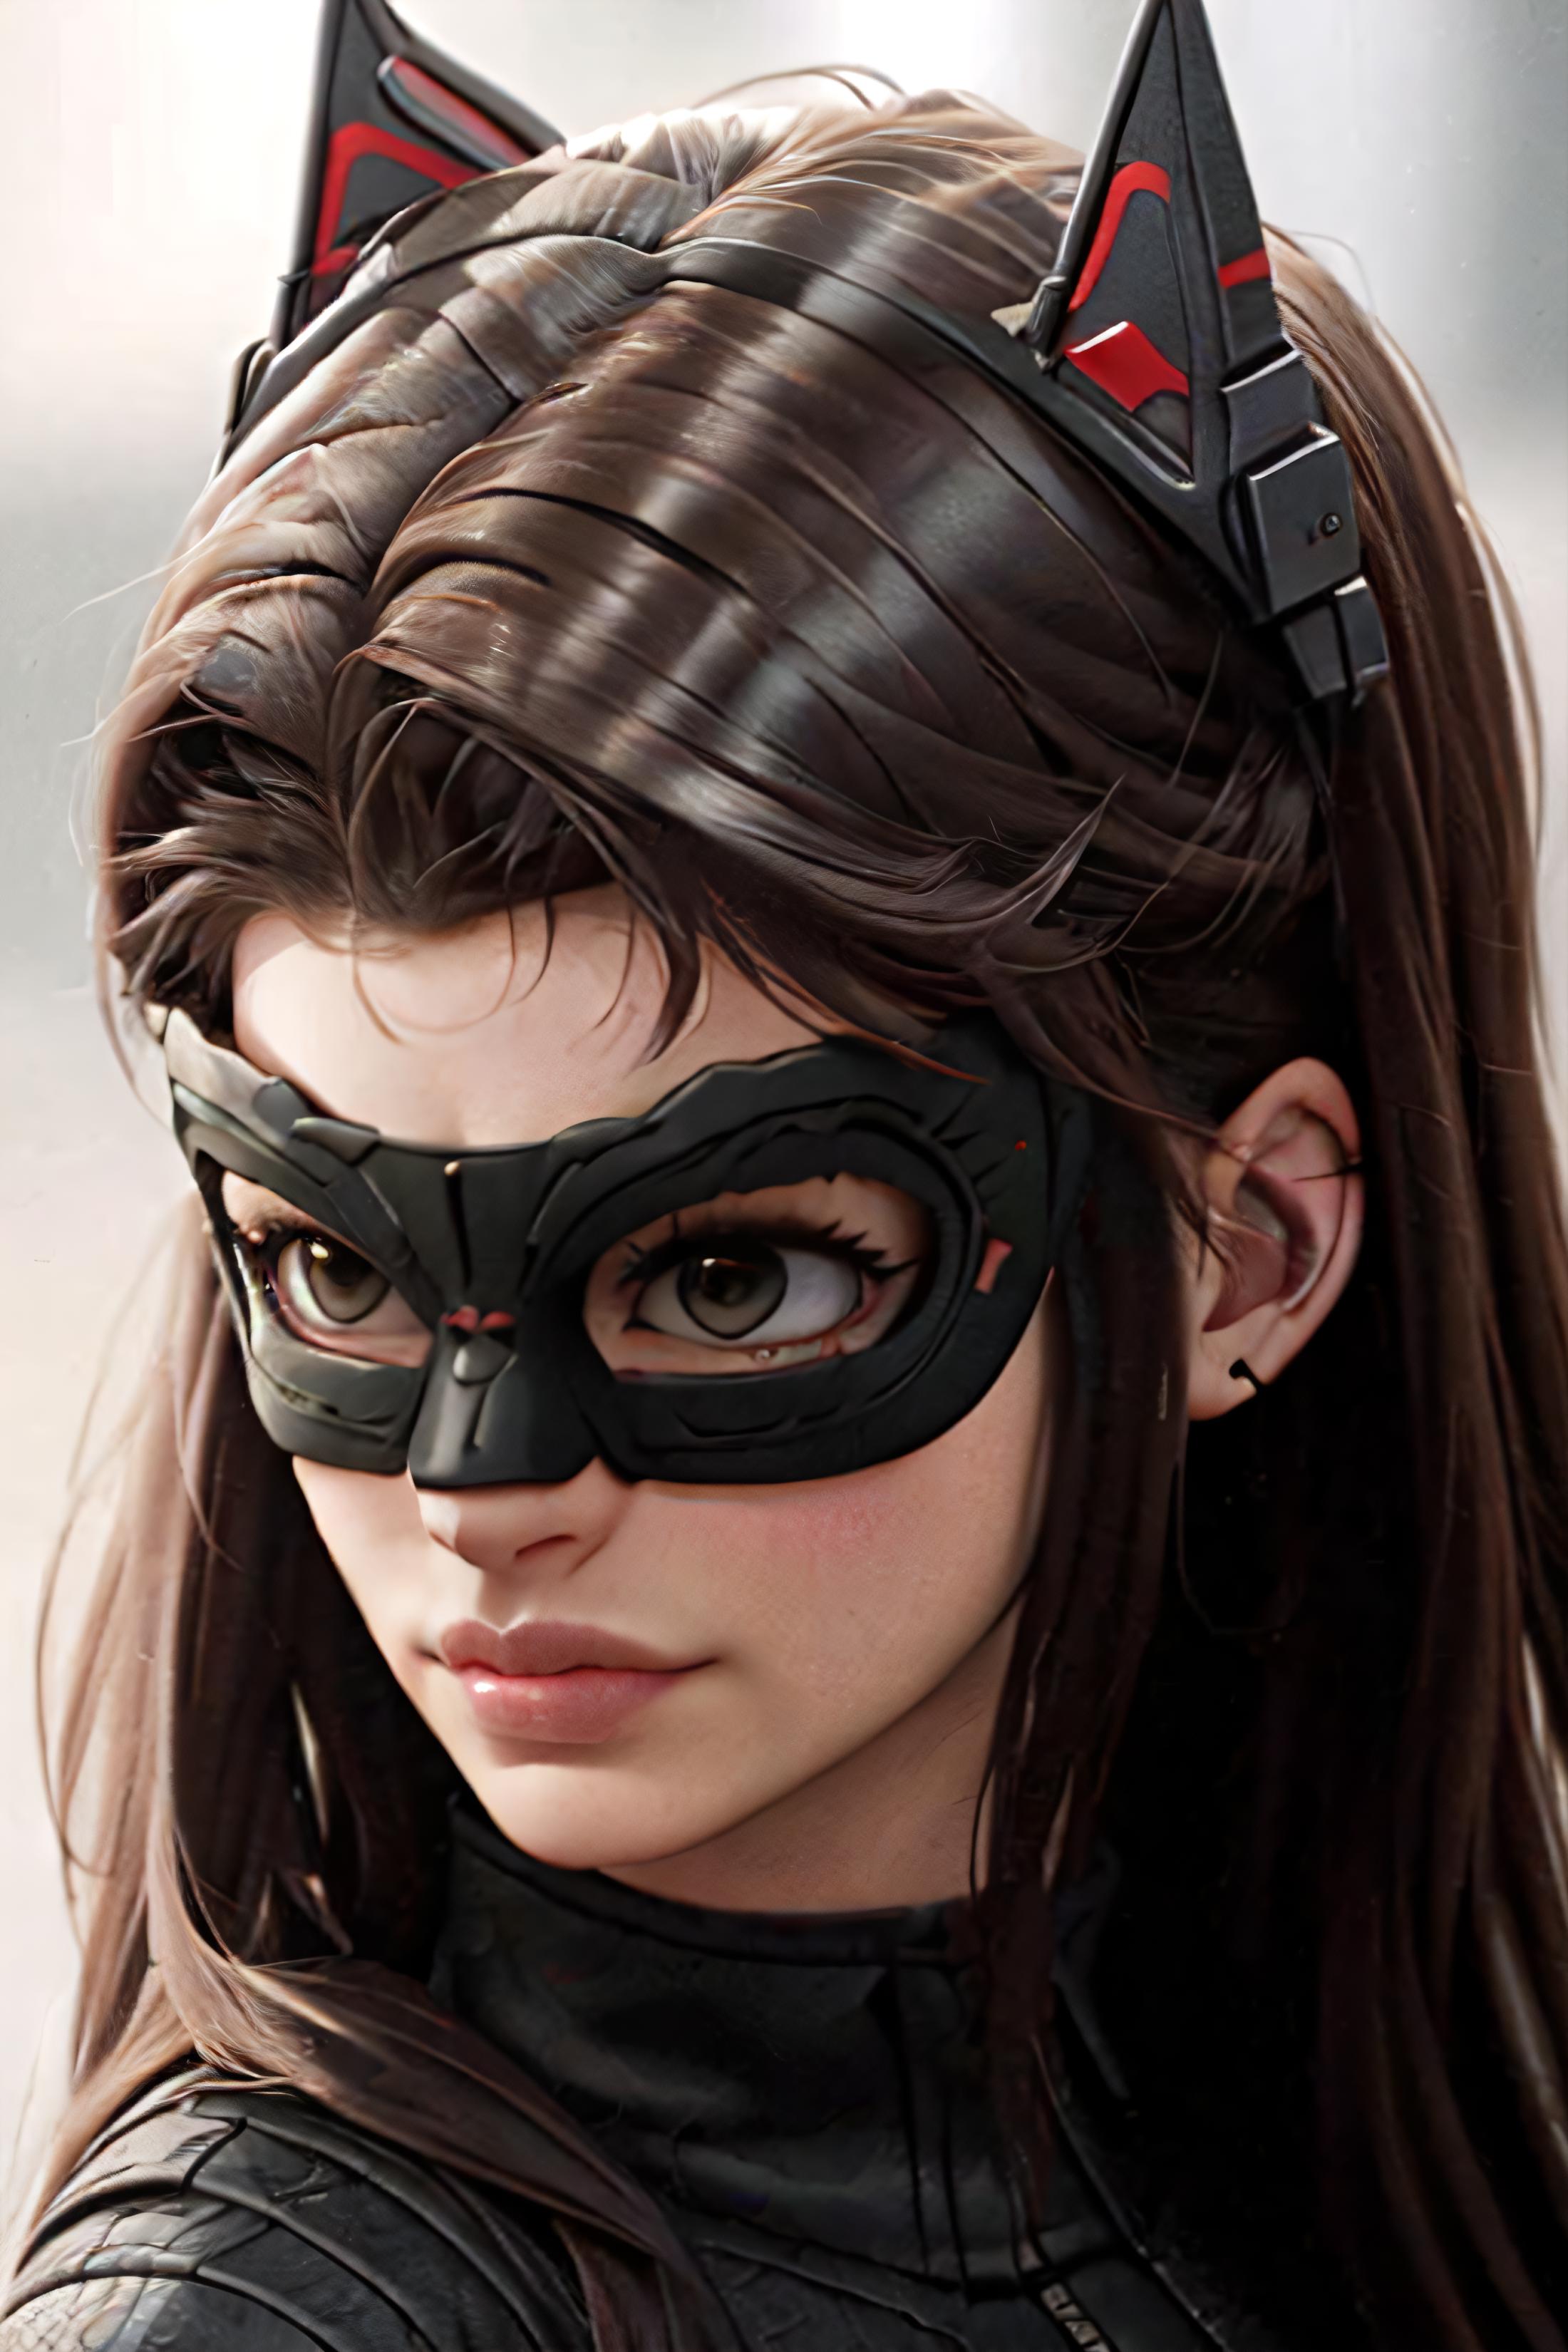 Anne Hathaway / Catwoman image by __2_